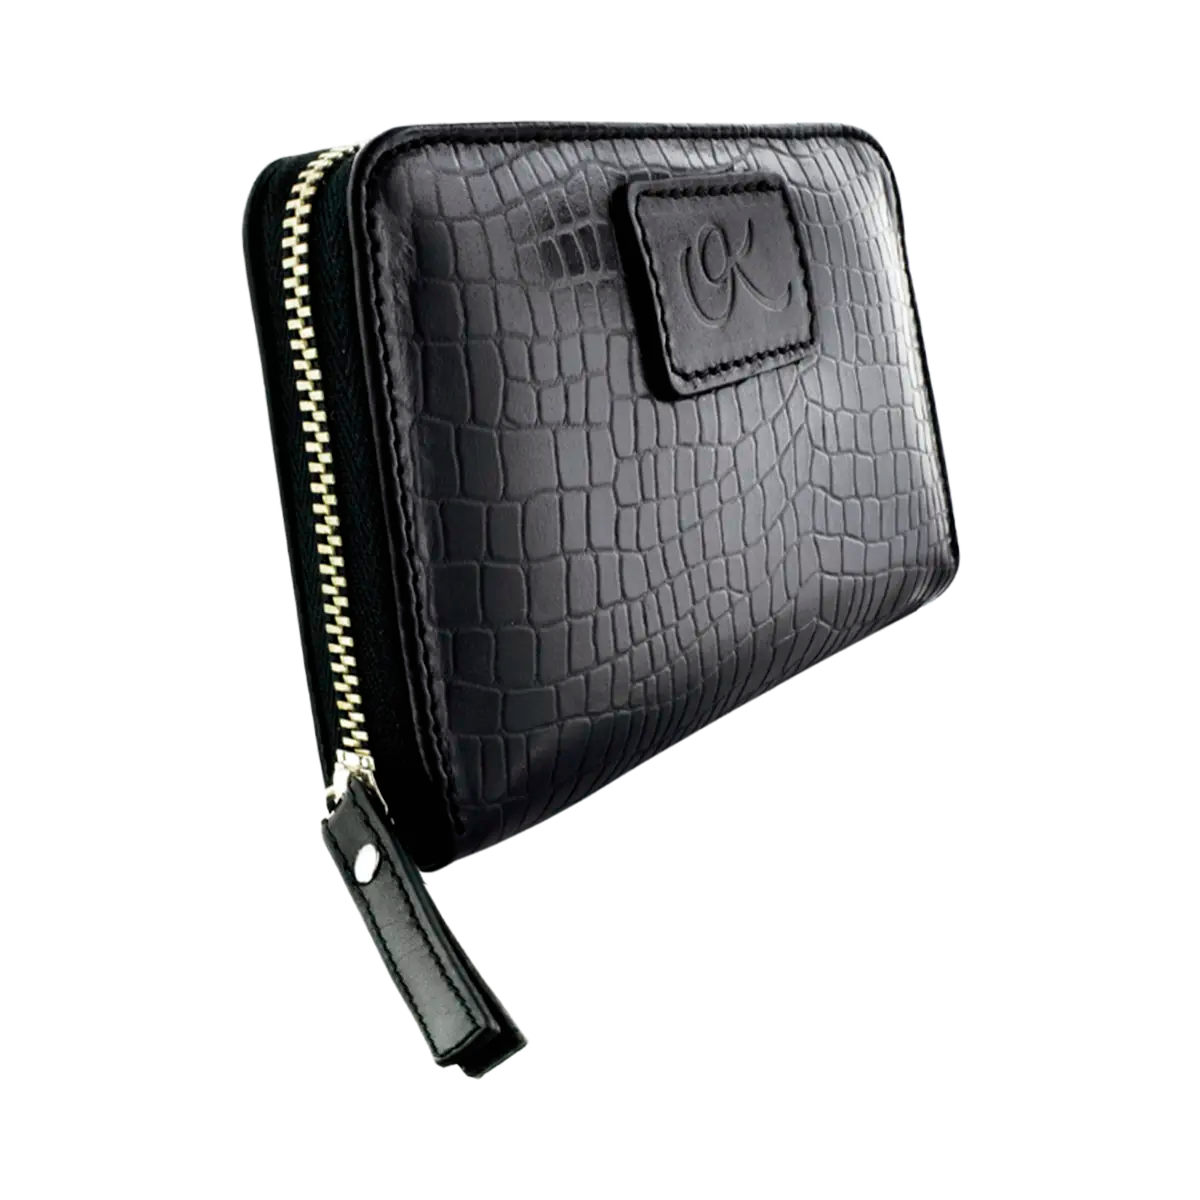 small black print leather wallet. Fashion Accessories for women in San Diego, CA.